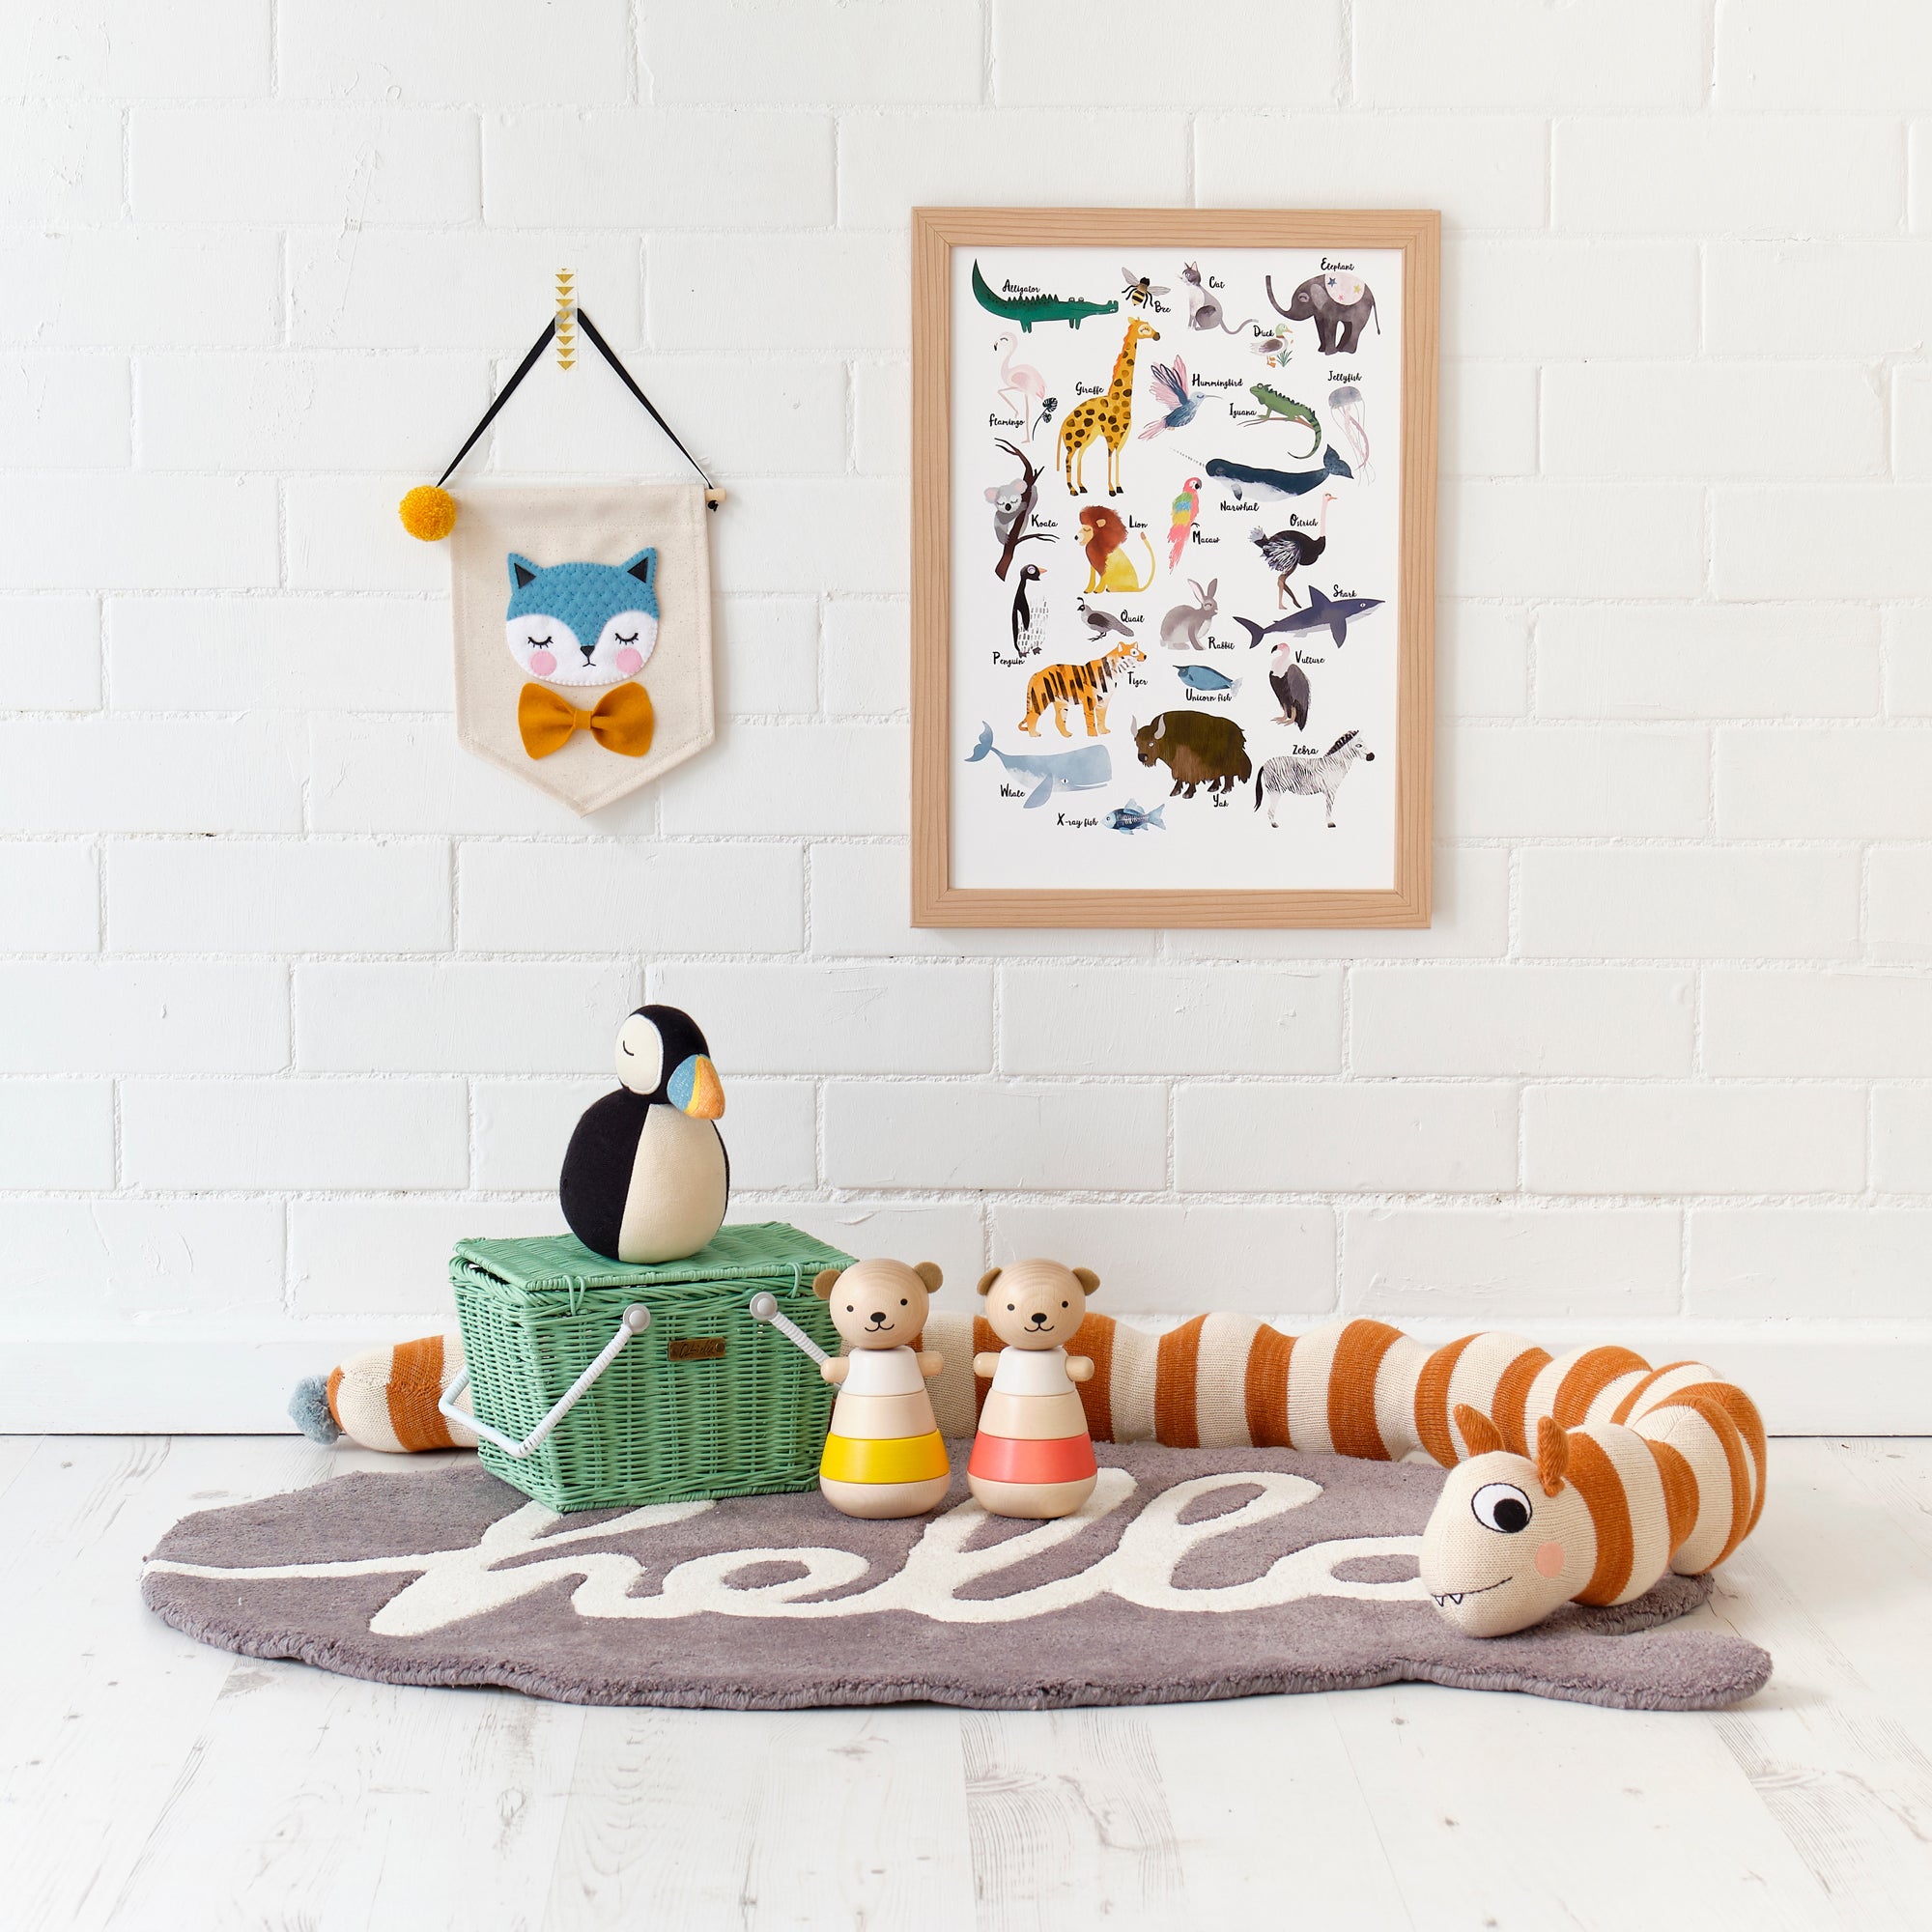 Children’s Toys and Accessories, styled by Bobby Rabbit.